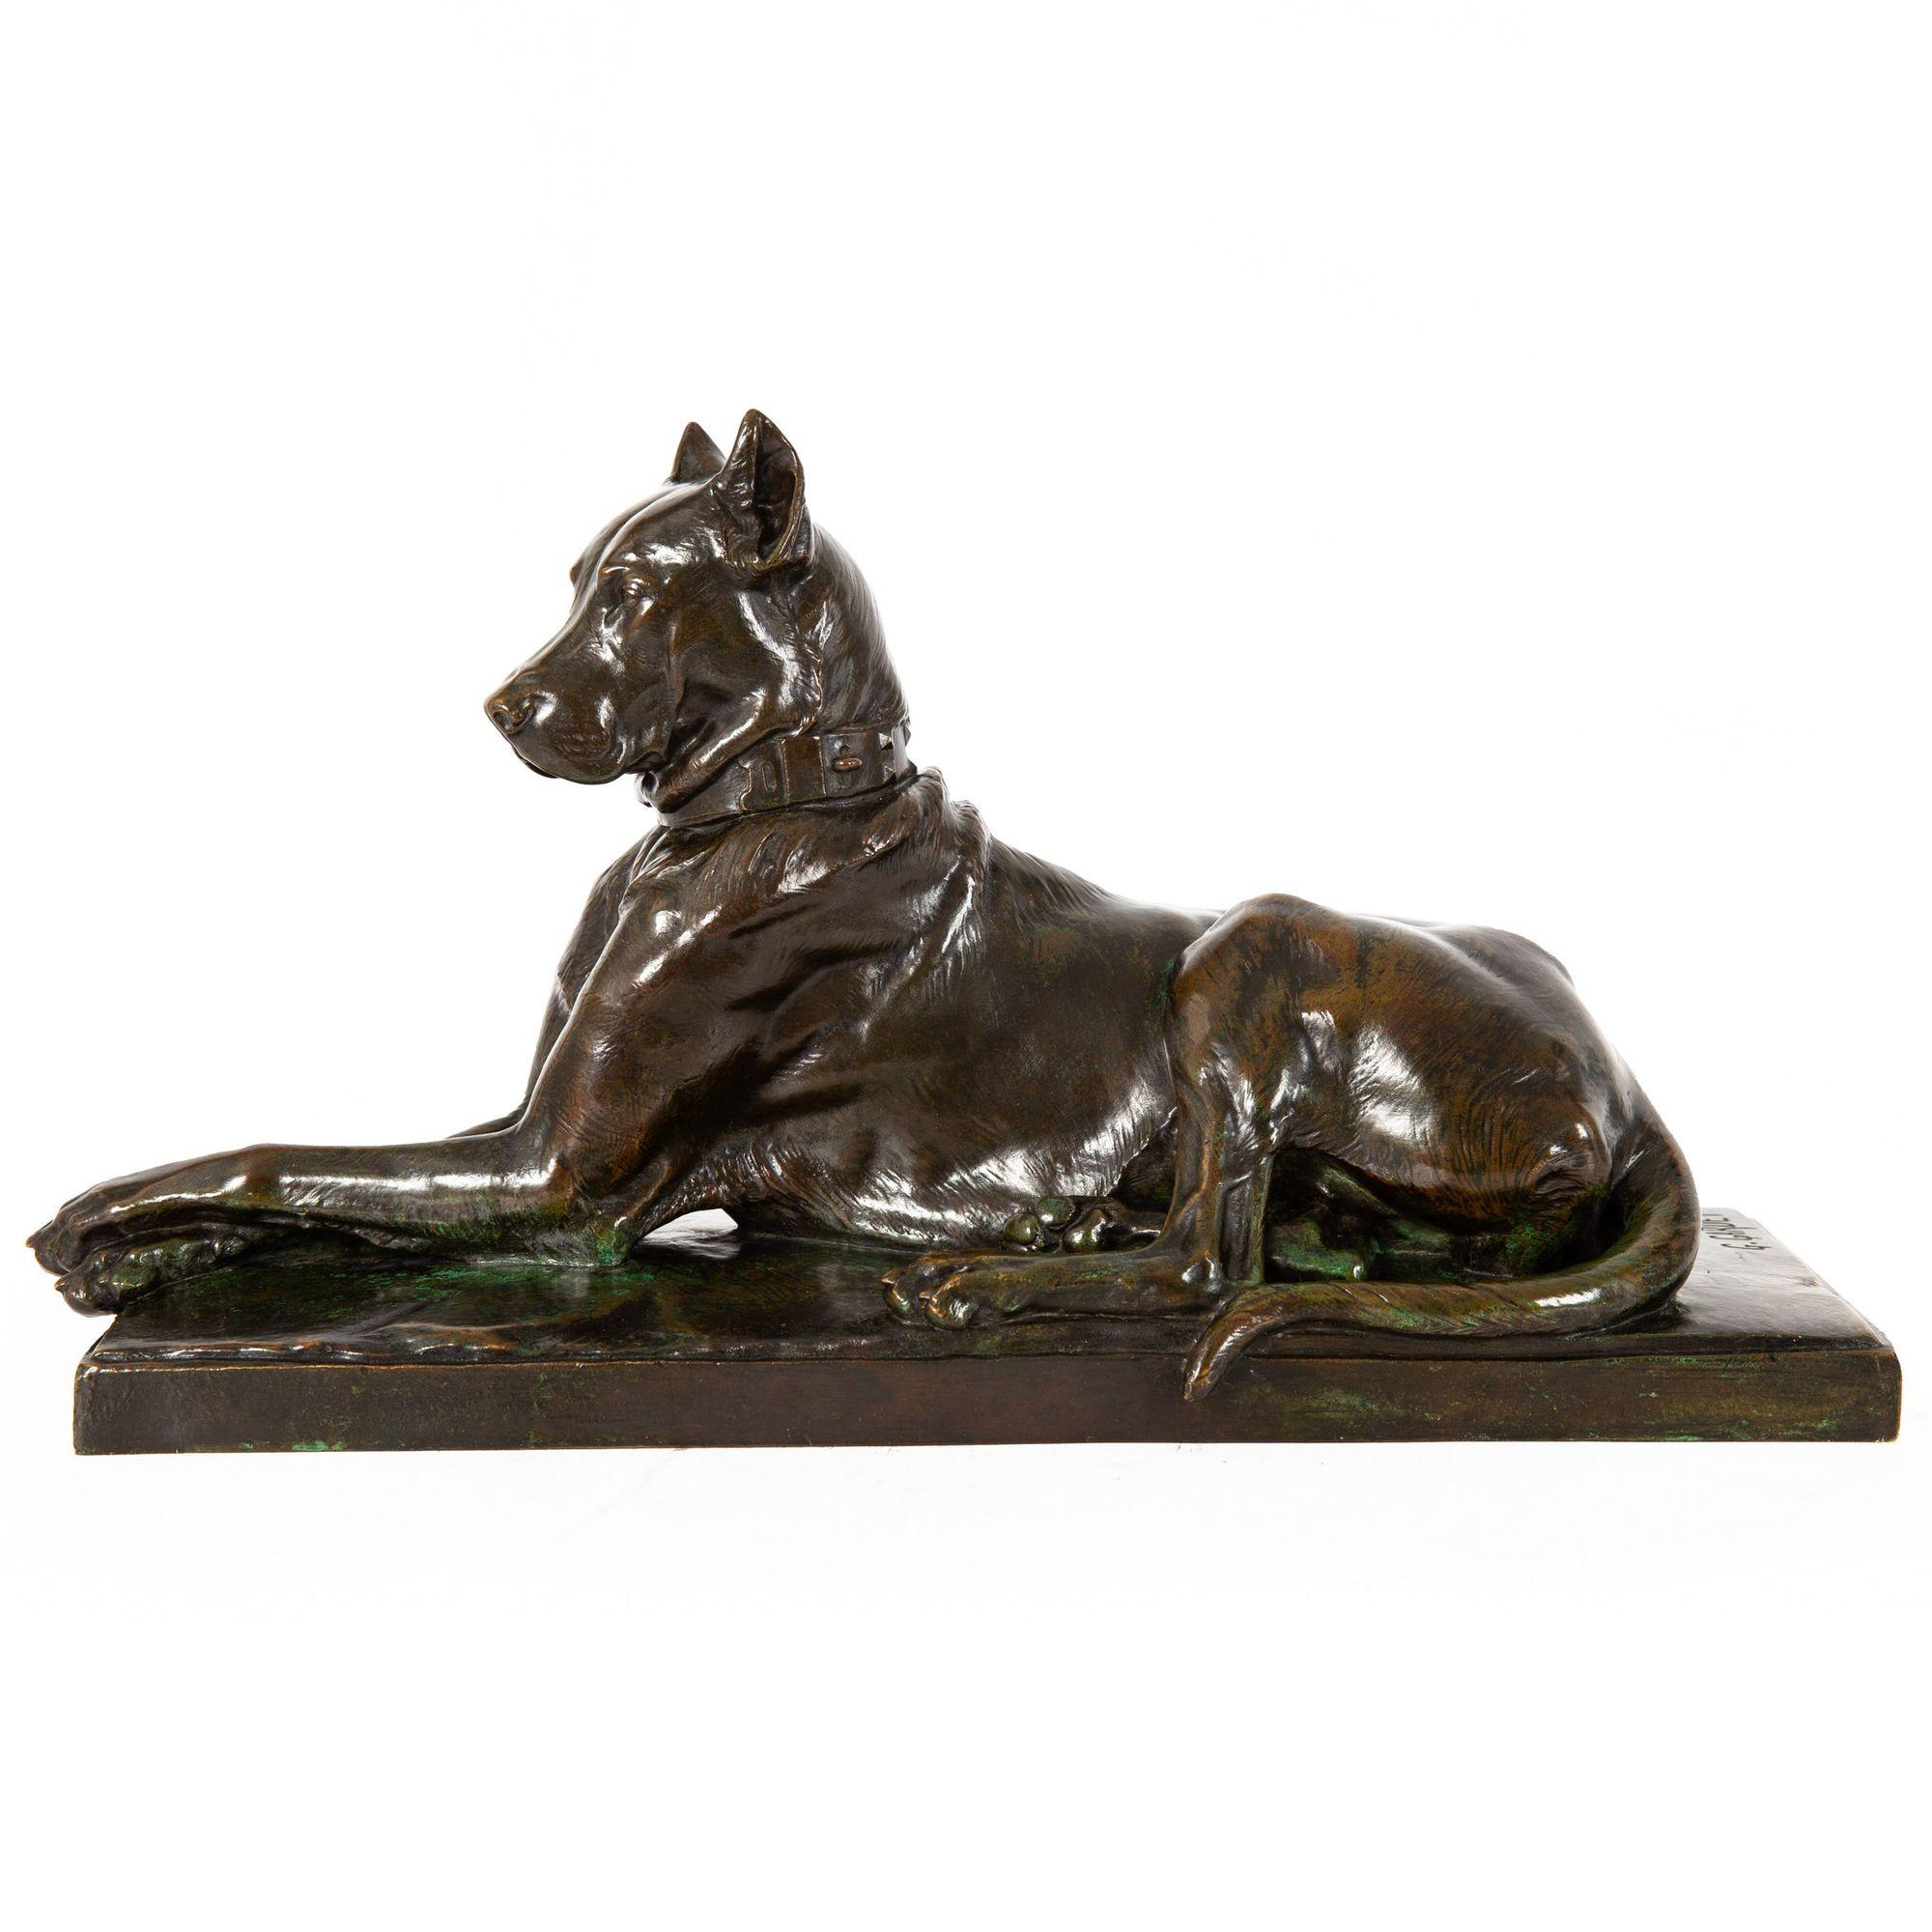 An exquisite casting of Gardet's Recumbent Great Dane with a nuanced black-over-medium-brown patination highlighted by trace verdigris, it is a silky cast with an underlying sensitivity in the modeling that casts a certain bokeh quality over the